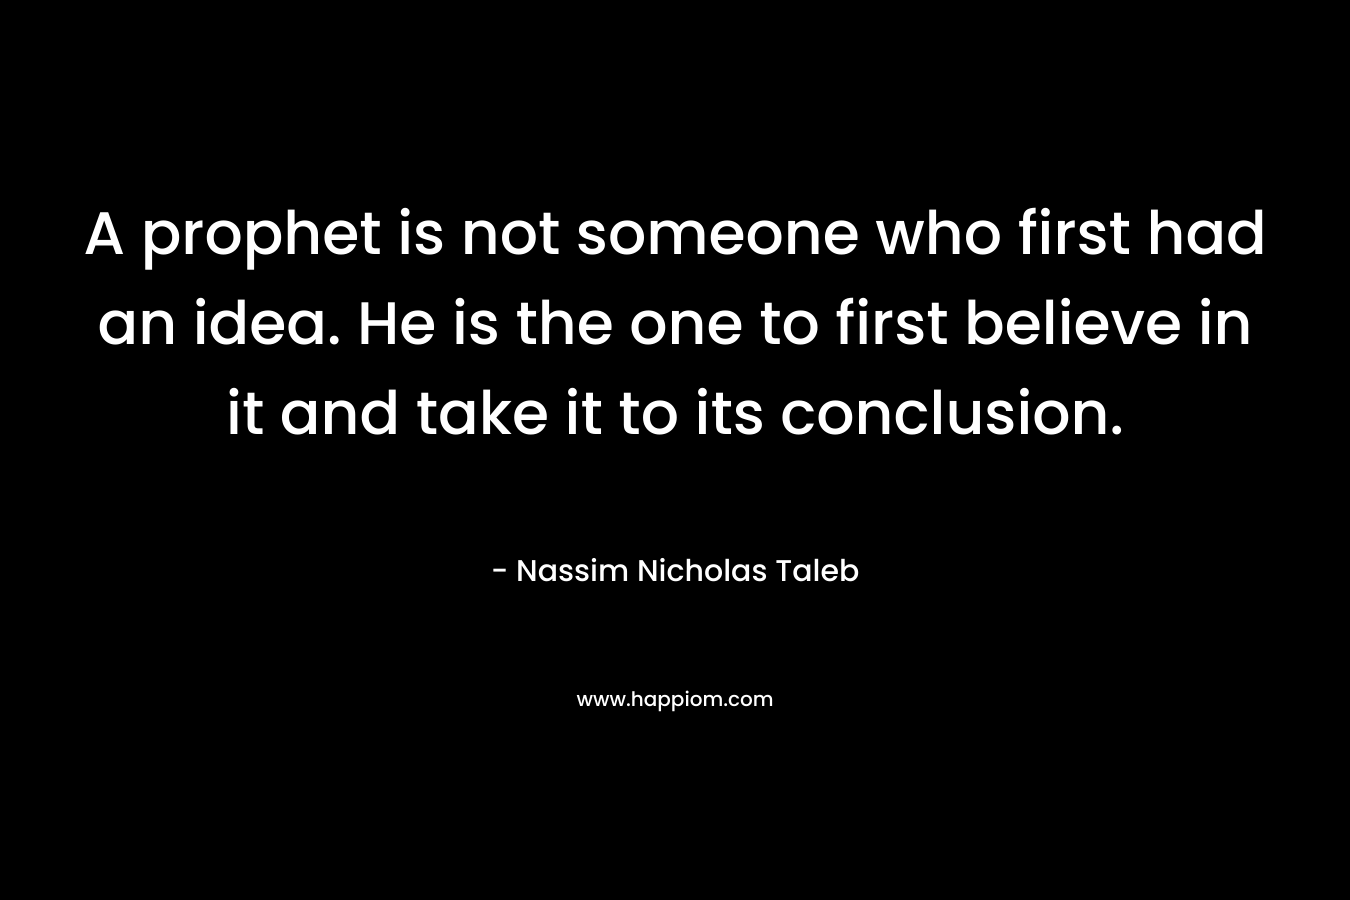 A prophet is not someone who first had an idea. He is the one to first believe in it and take it to its conclusion.